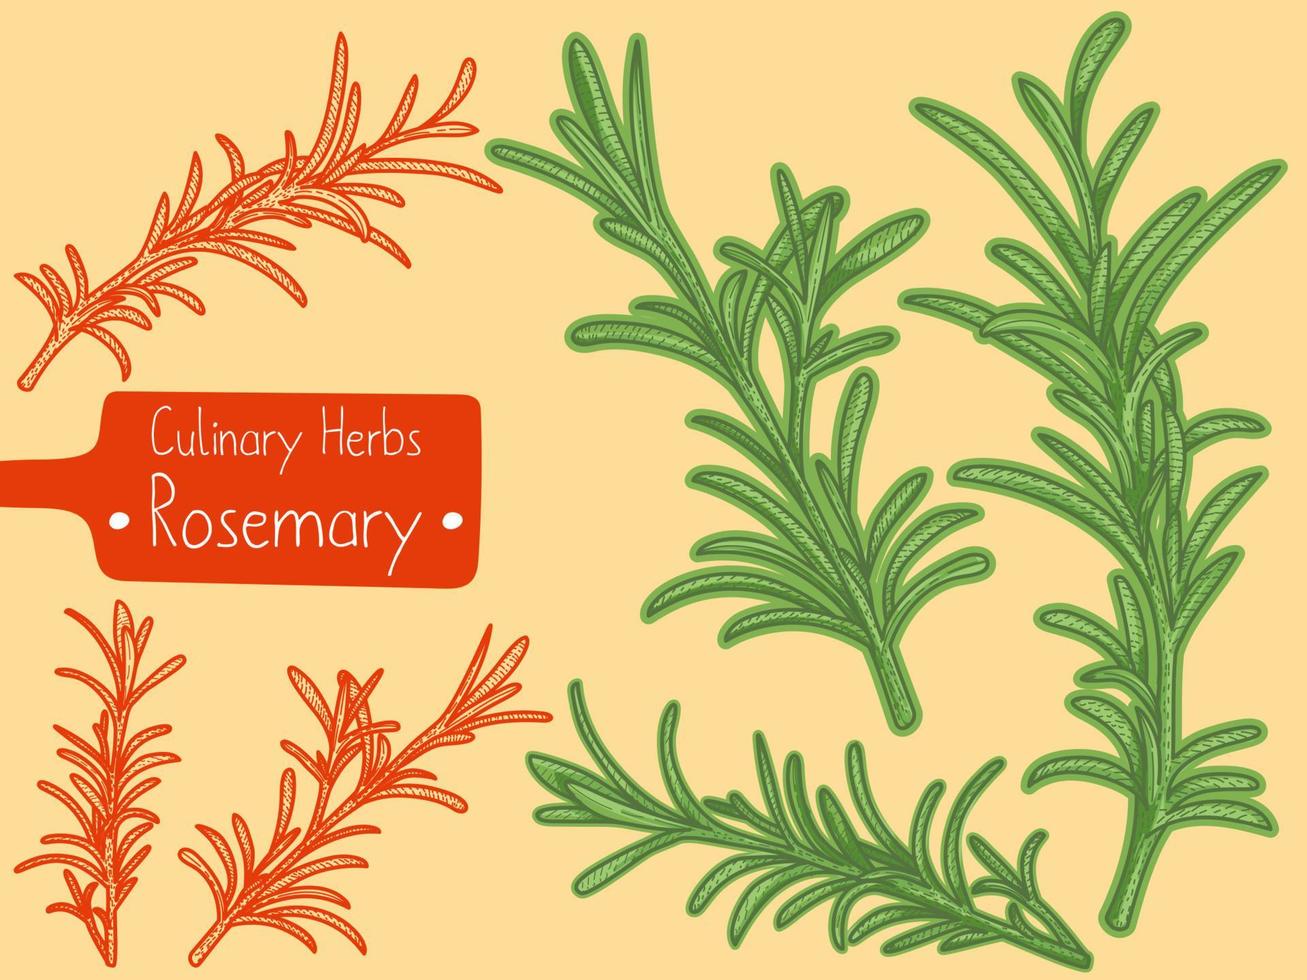 Branches of culinary herb Rosemary vector